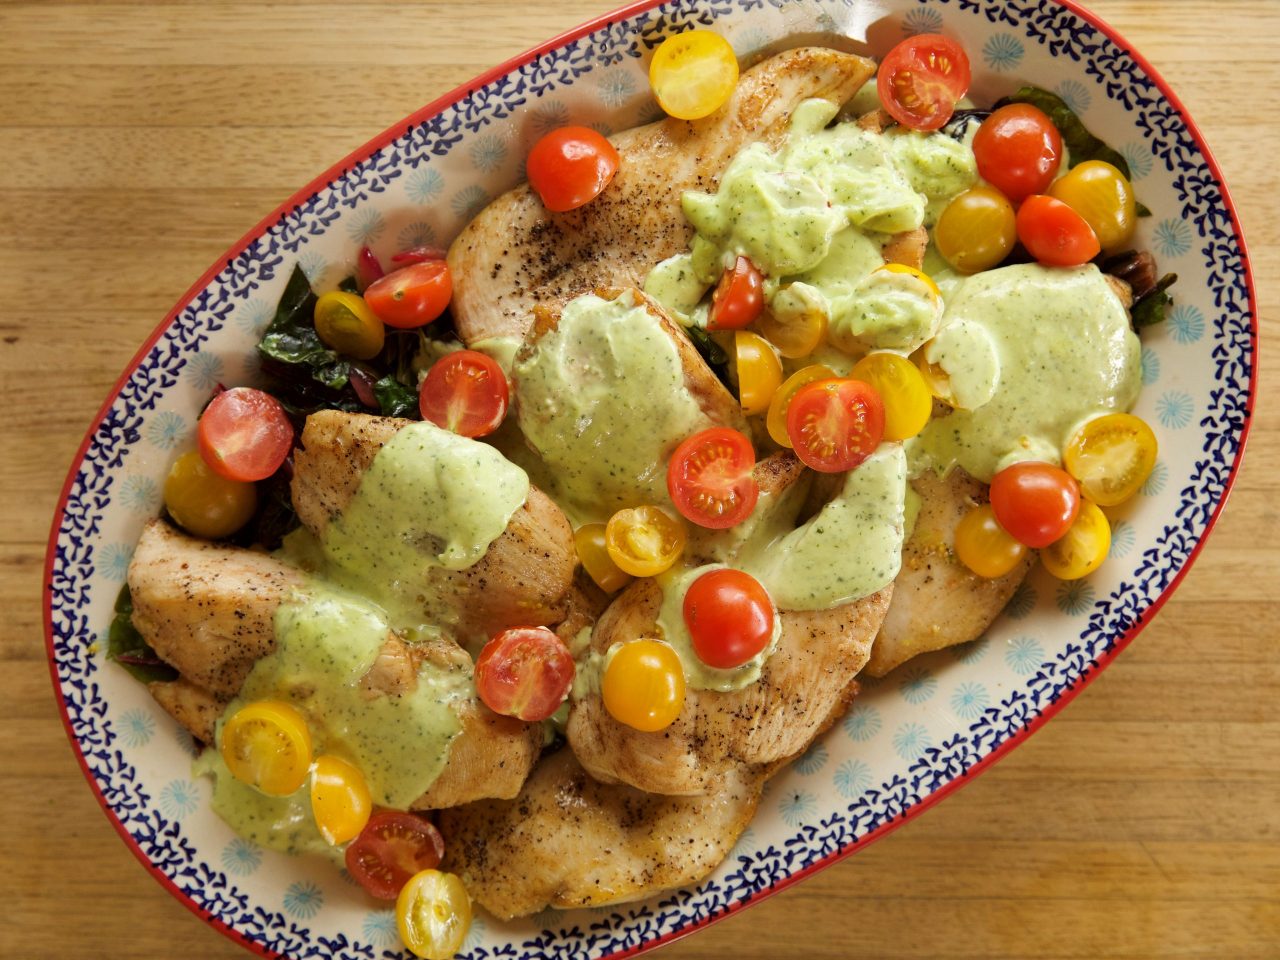 Ree Drummond's Chicken with Pesto Cream, as seen on The Pioneer Woman.